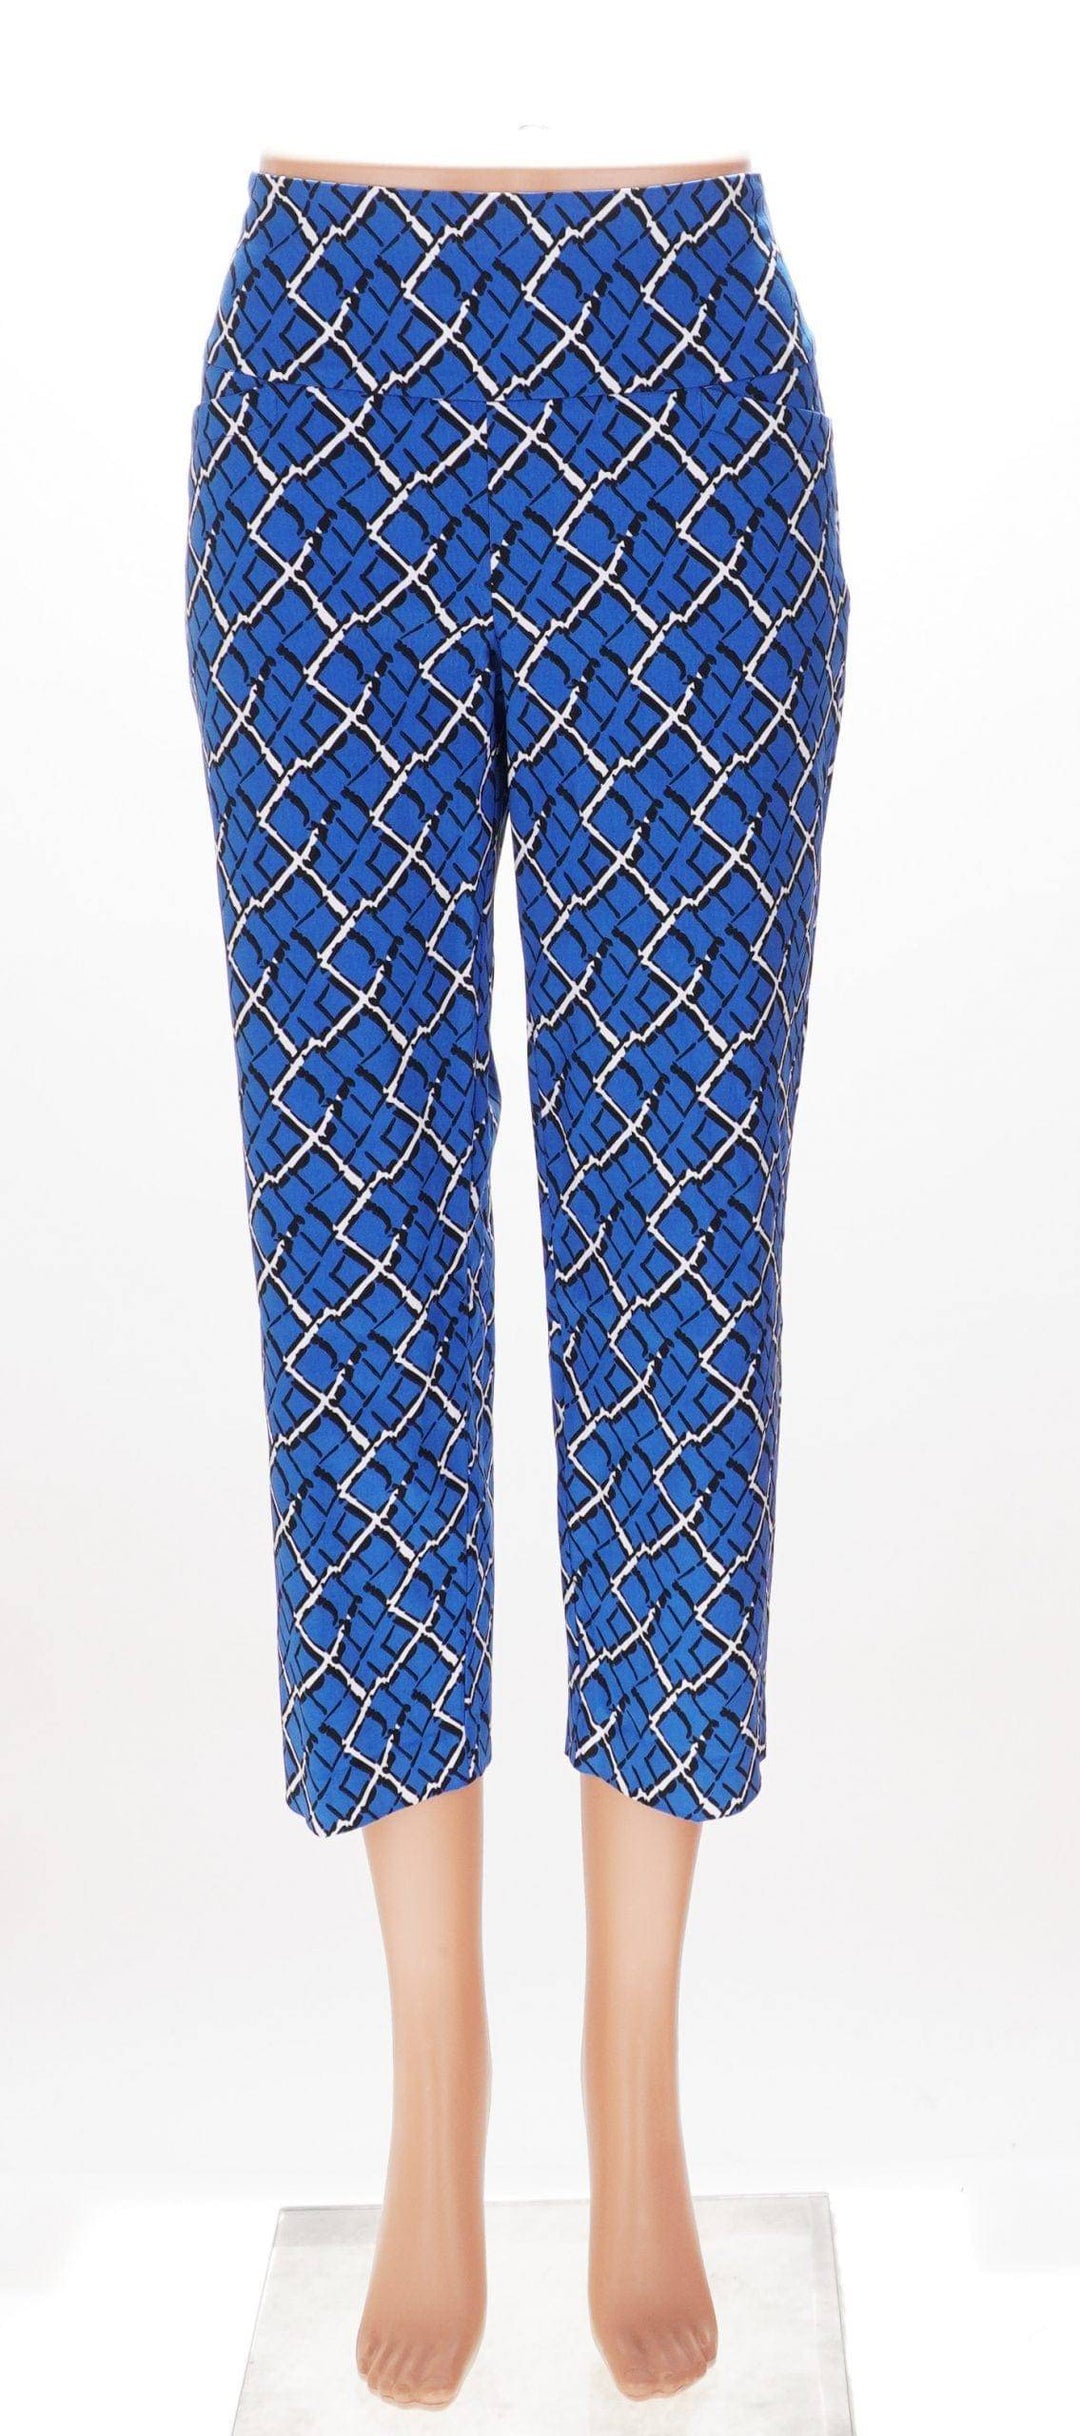 Swing Control Swing Control Cropped Pants - Turkish Sea Squares - Size 6